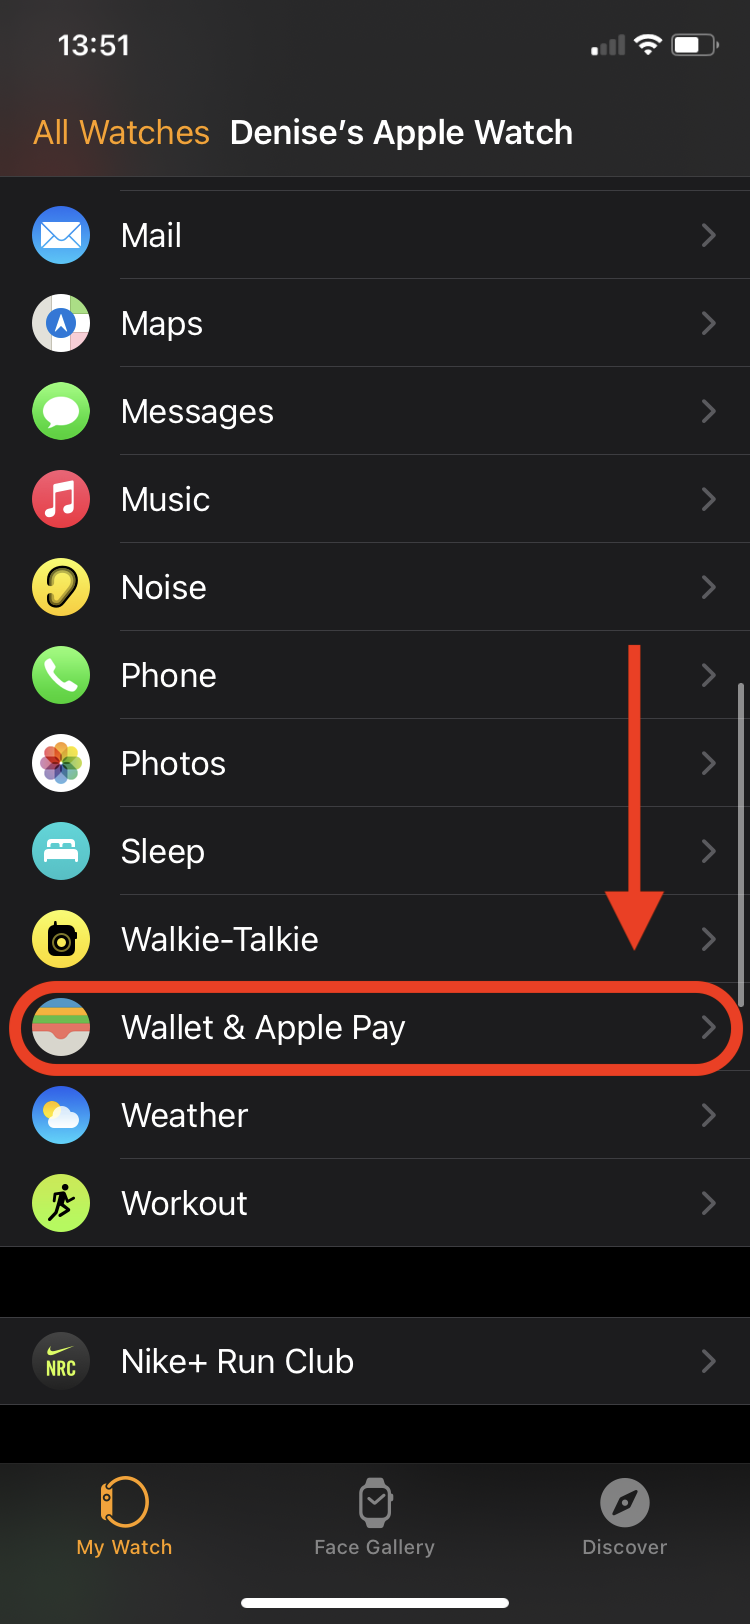 How to use Apple Pay on Apple Watch - wallet and apple pay